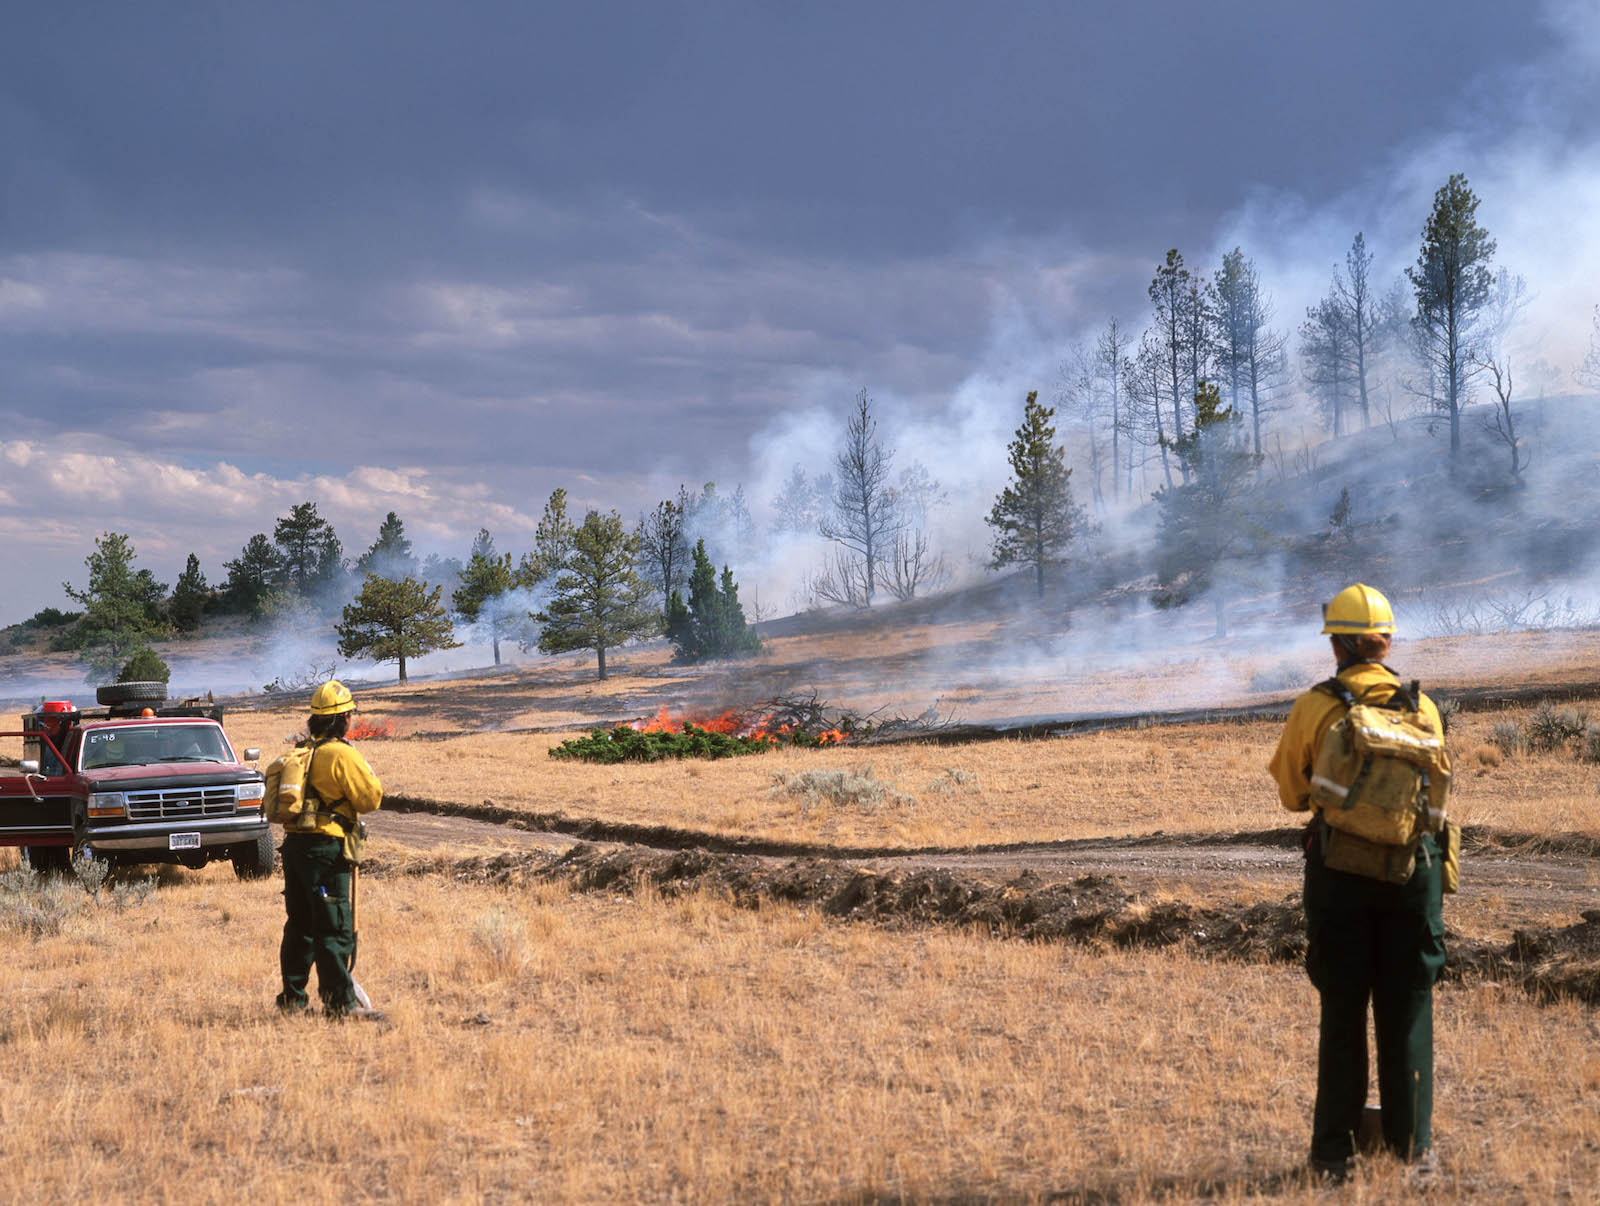 smoke billows out of trees near a dry yellow field as firefighters spray water